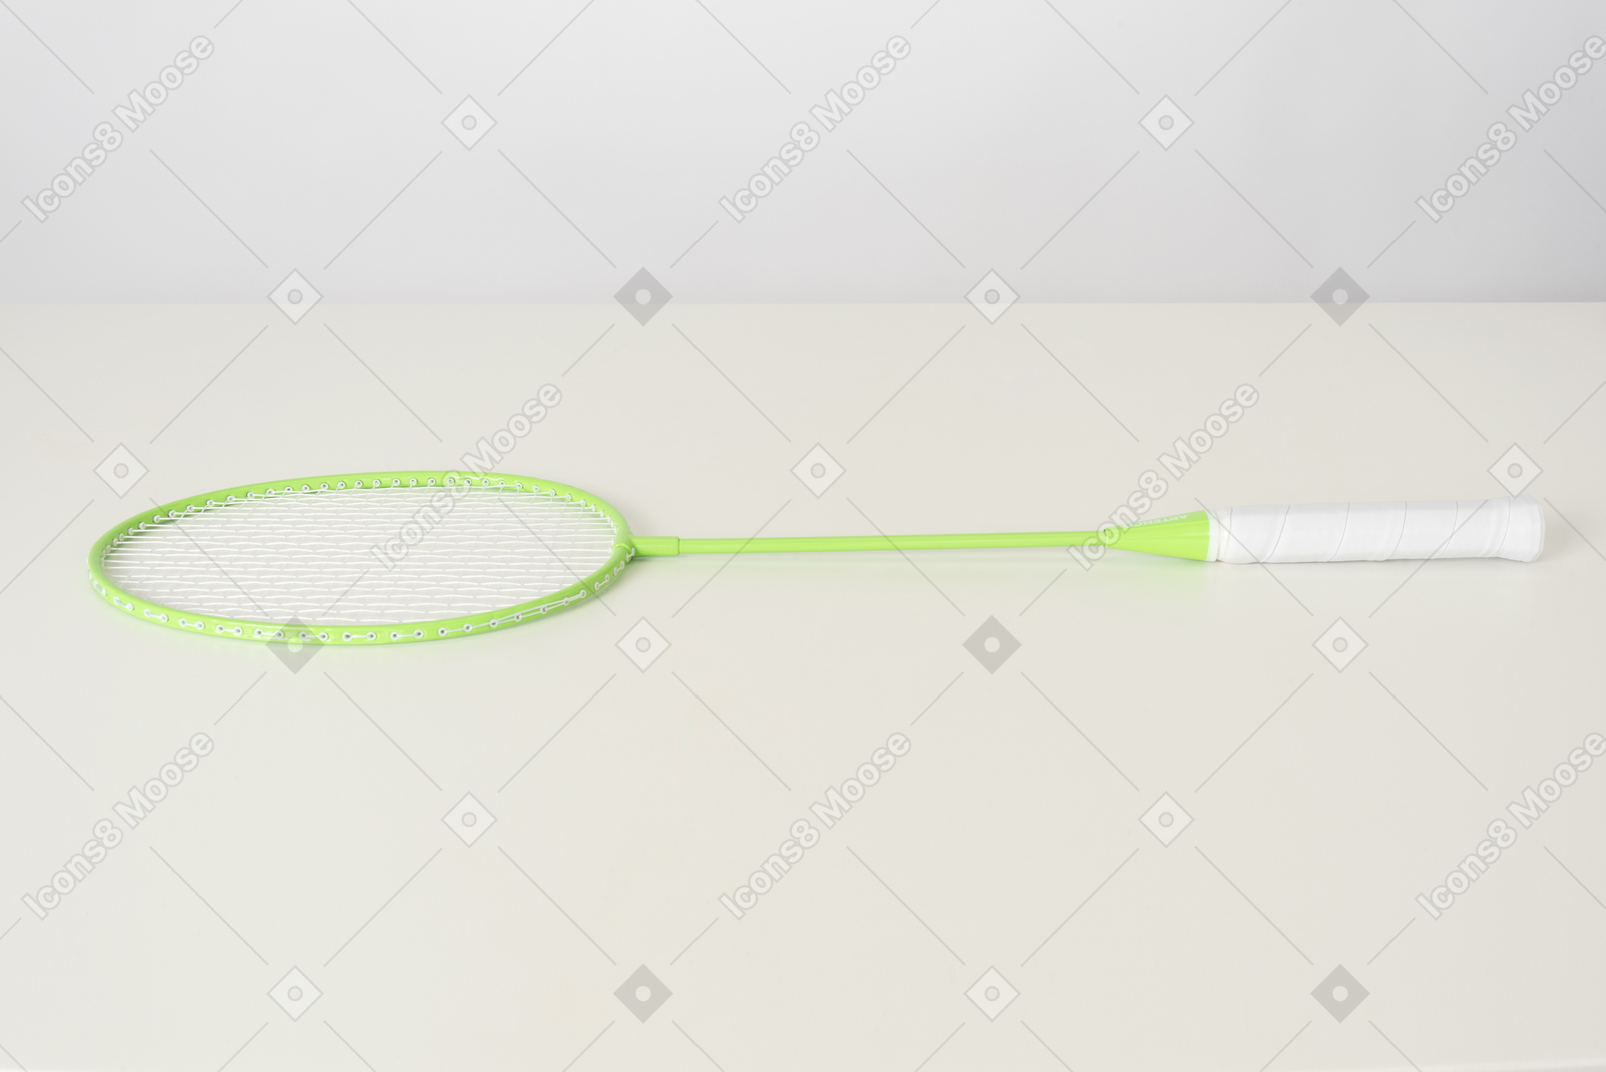 Green tennis racket on a white background